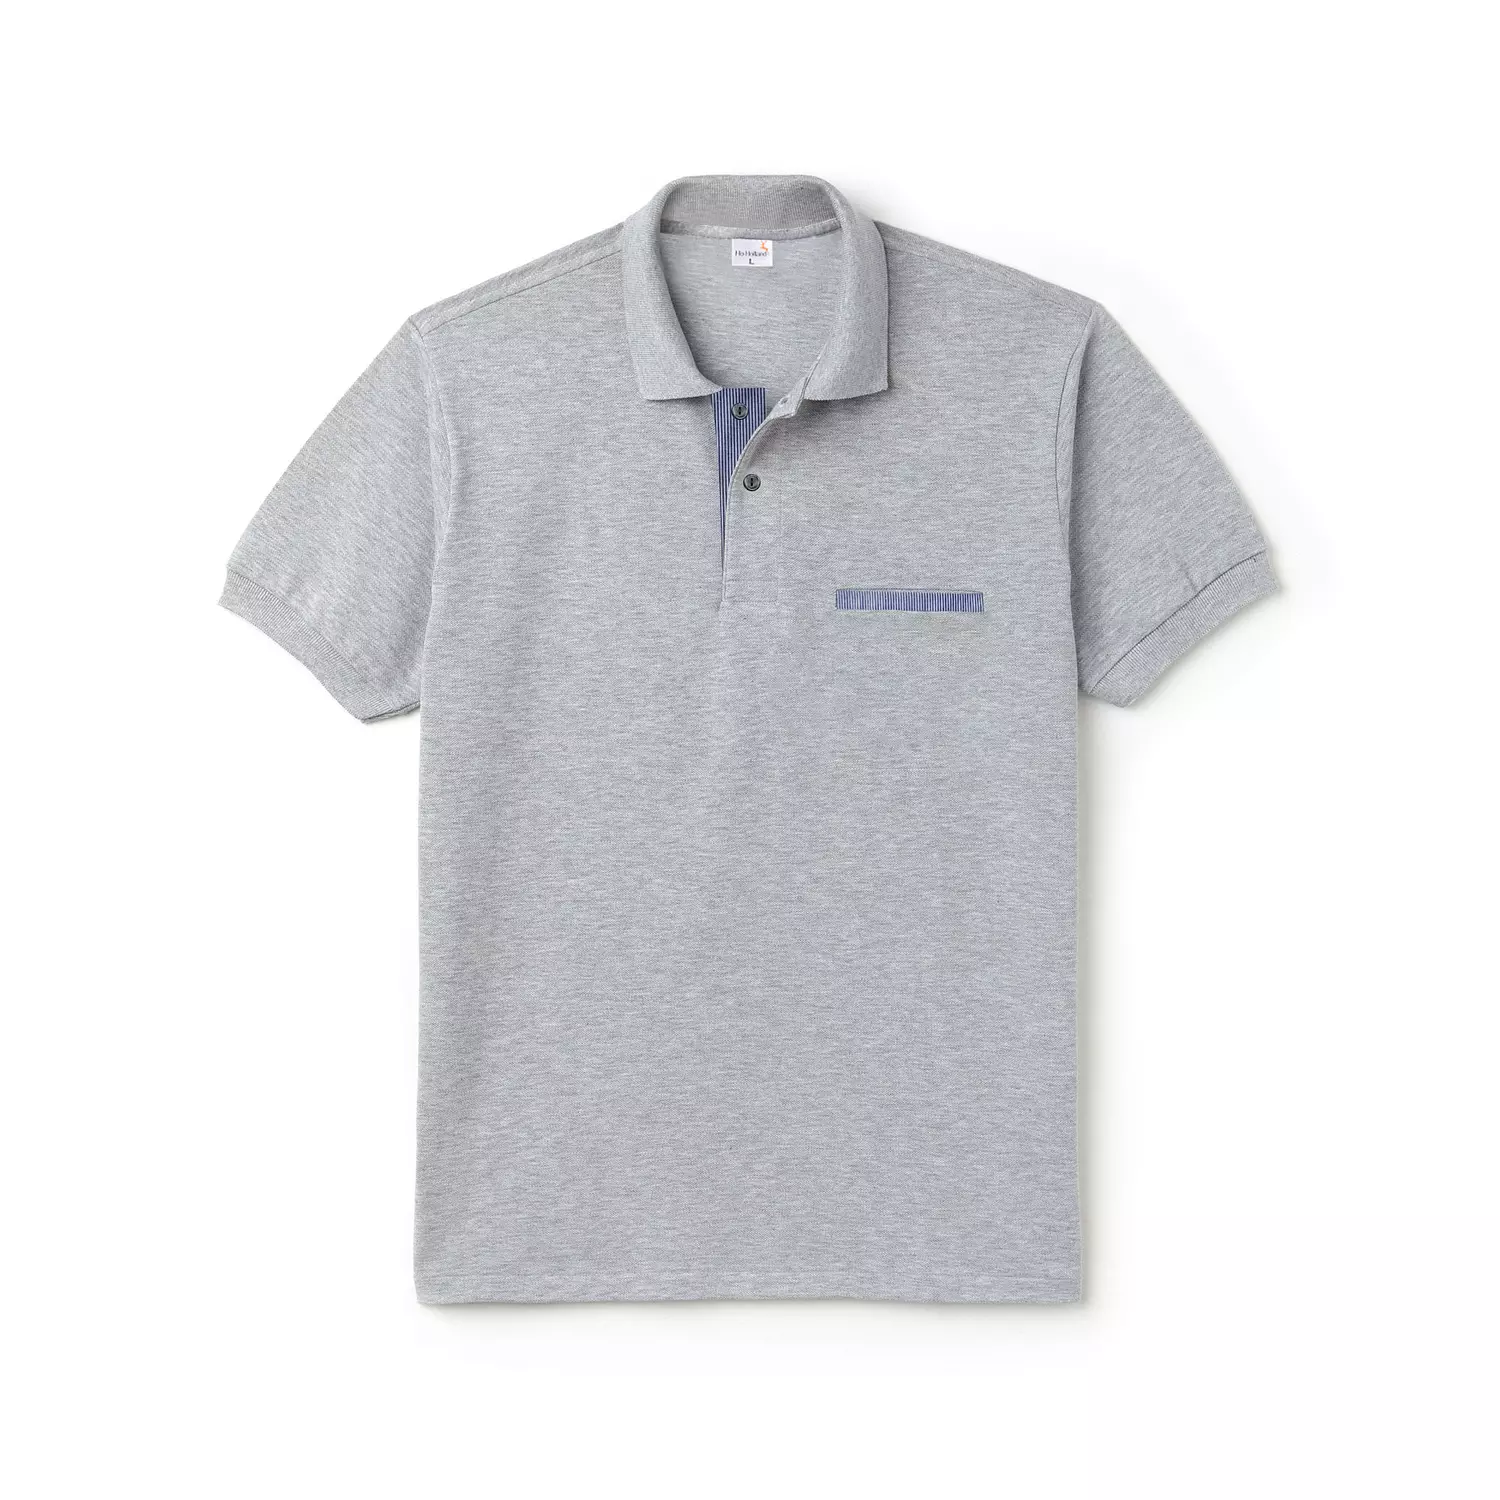 New Polo T shirt - White  hover image